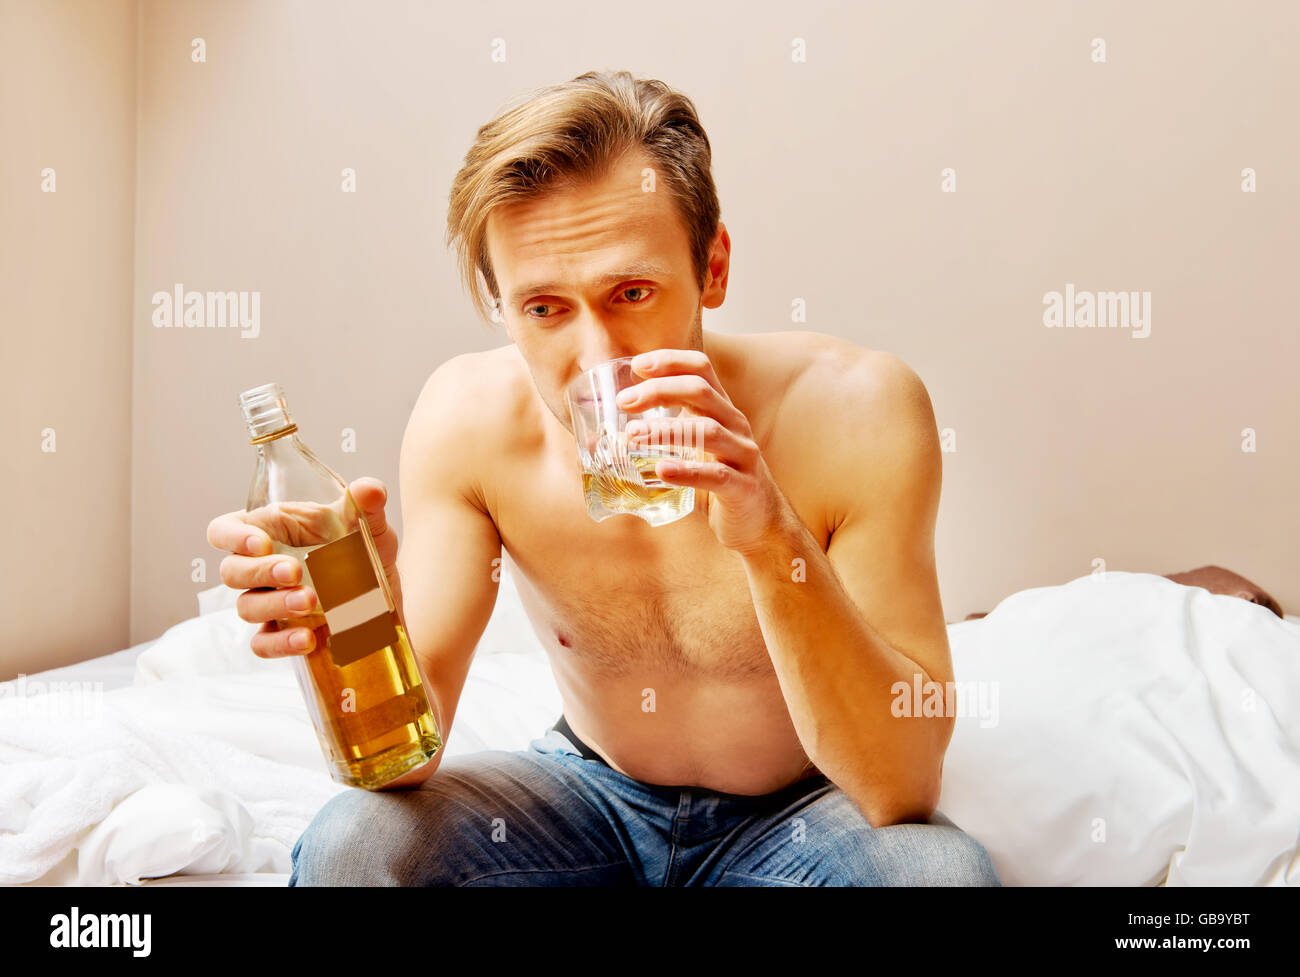 Drunk man sitting on bed and drinking whiskey Stock Photo